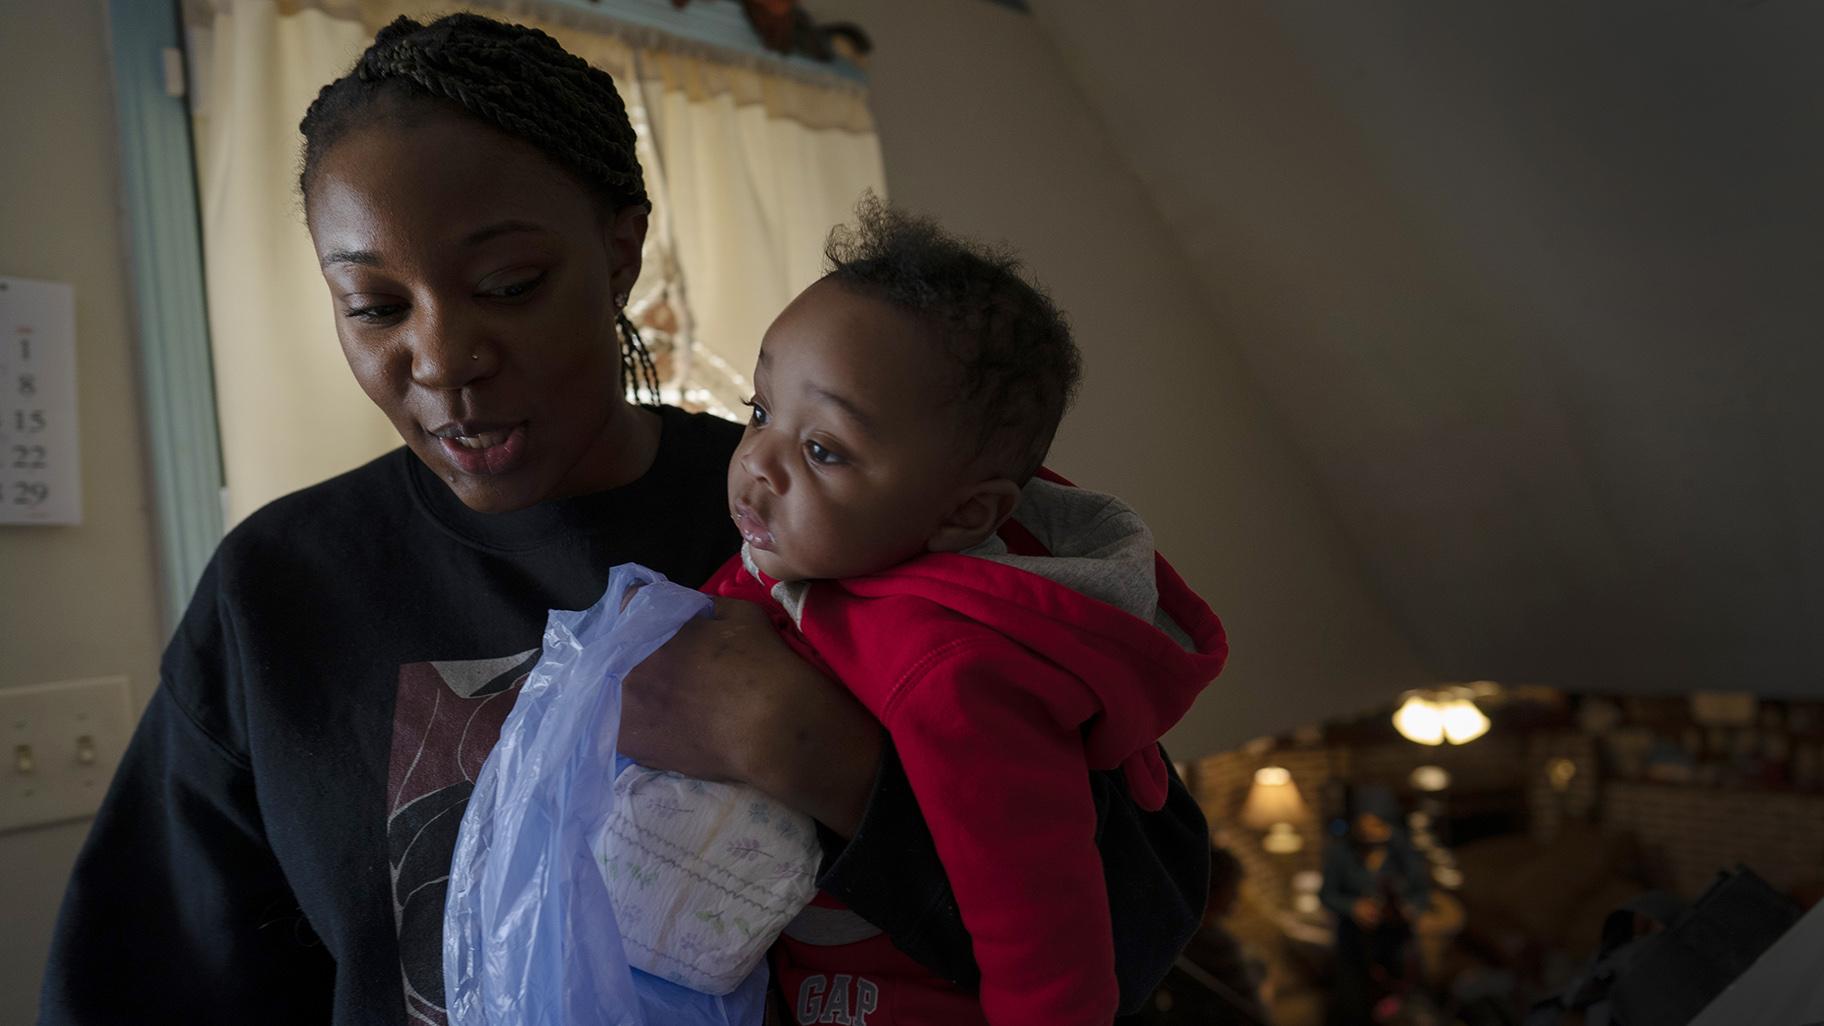 Ansonia Lyons carries her son, Adrien Lyons, as she takes him for a diaper change in Birmingham, Ala., on Saturday, Feb. 5, 2022. After two miscarriages, Ansonia became pregnant in 2020, and it was difficult. (AP Photo / Wong Maye-E, File)